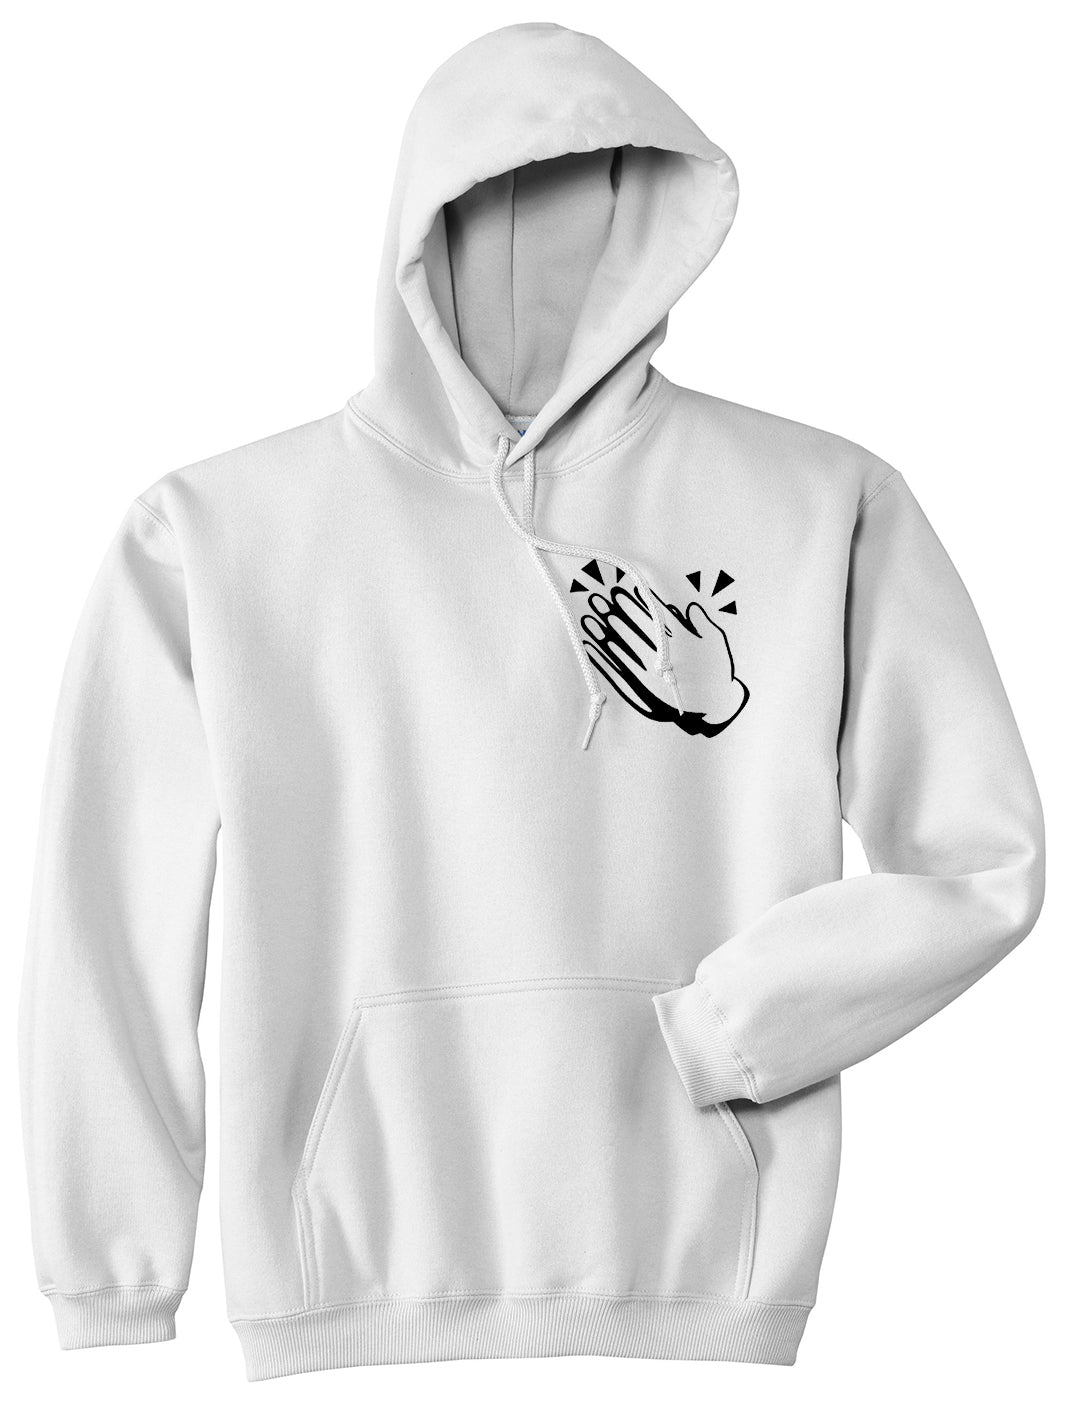 Clapping Hands Emoji Chest Mens White Pullover Hoodie by Kings Of NY